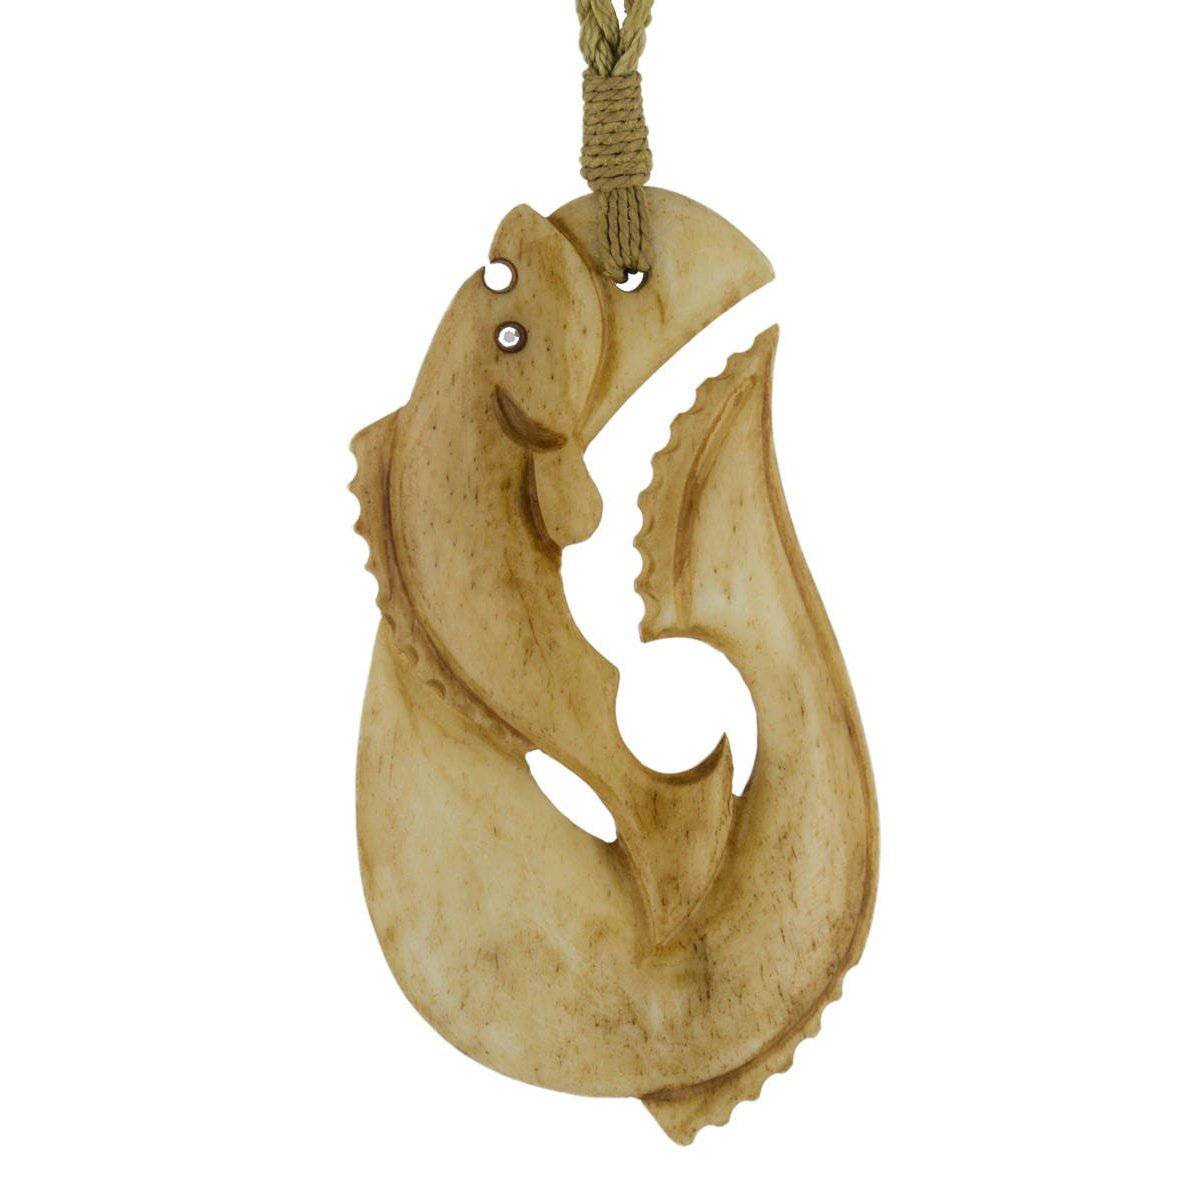 Pacific Salmon Inspired, Aged Bone Fish Hook Necklace - Earthbound Pacific Camo / Aged Look